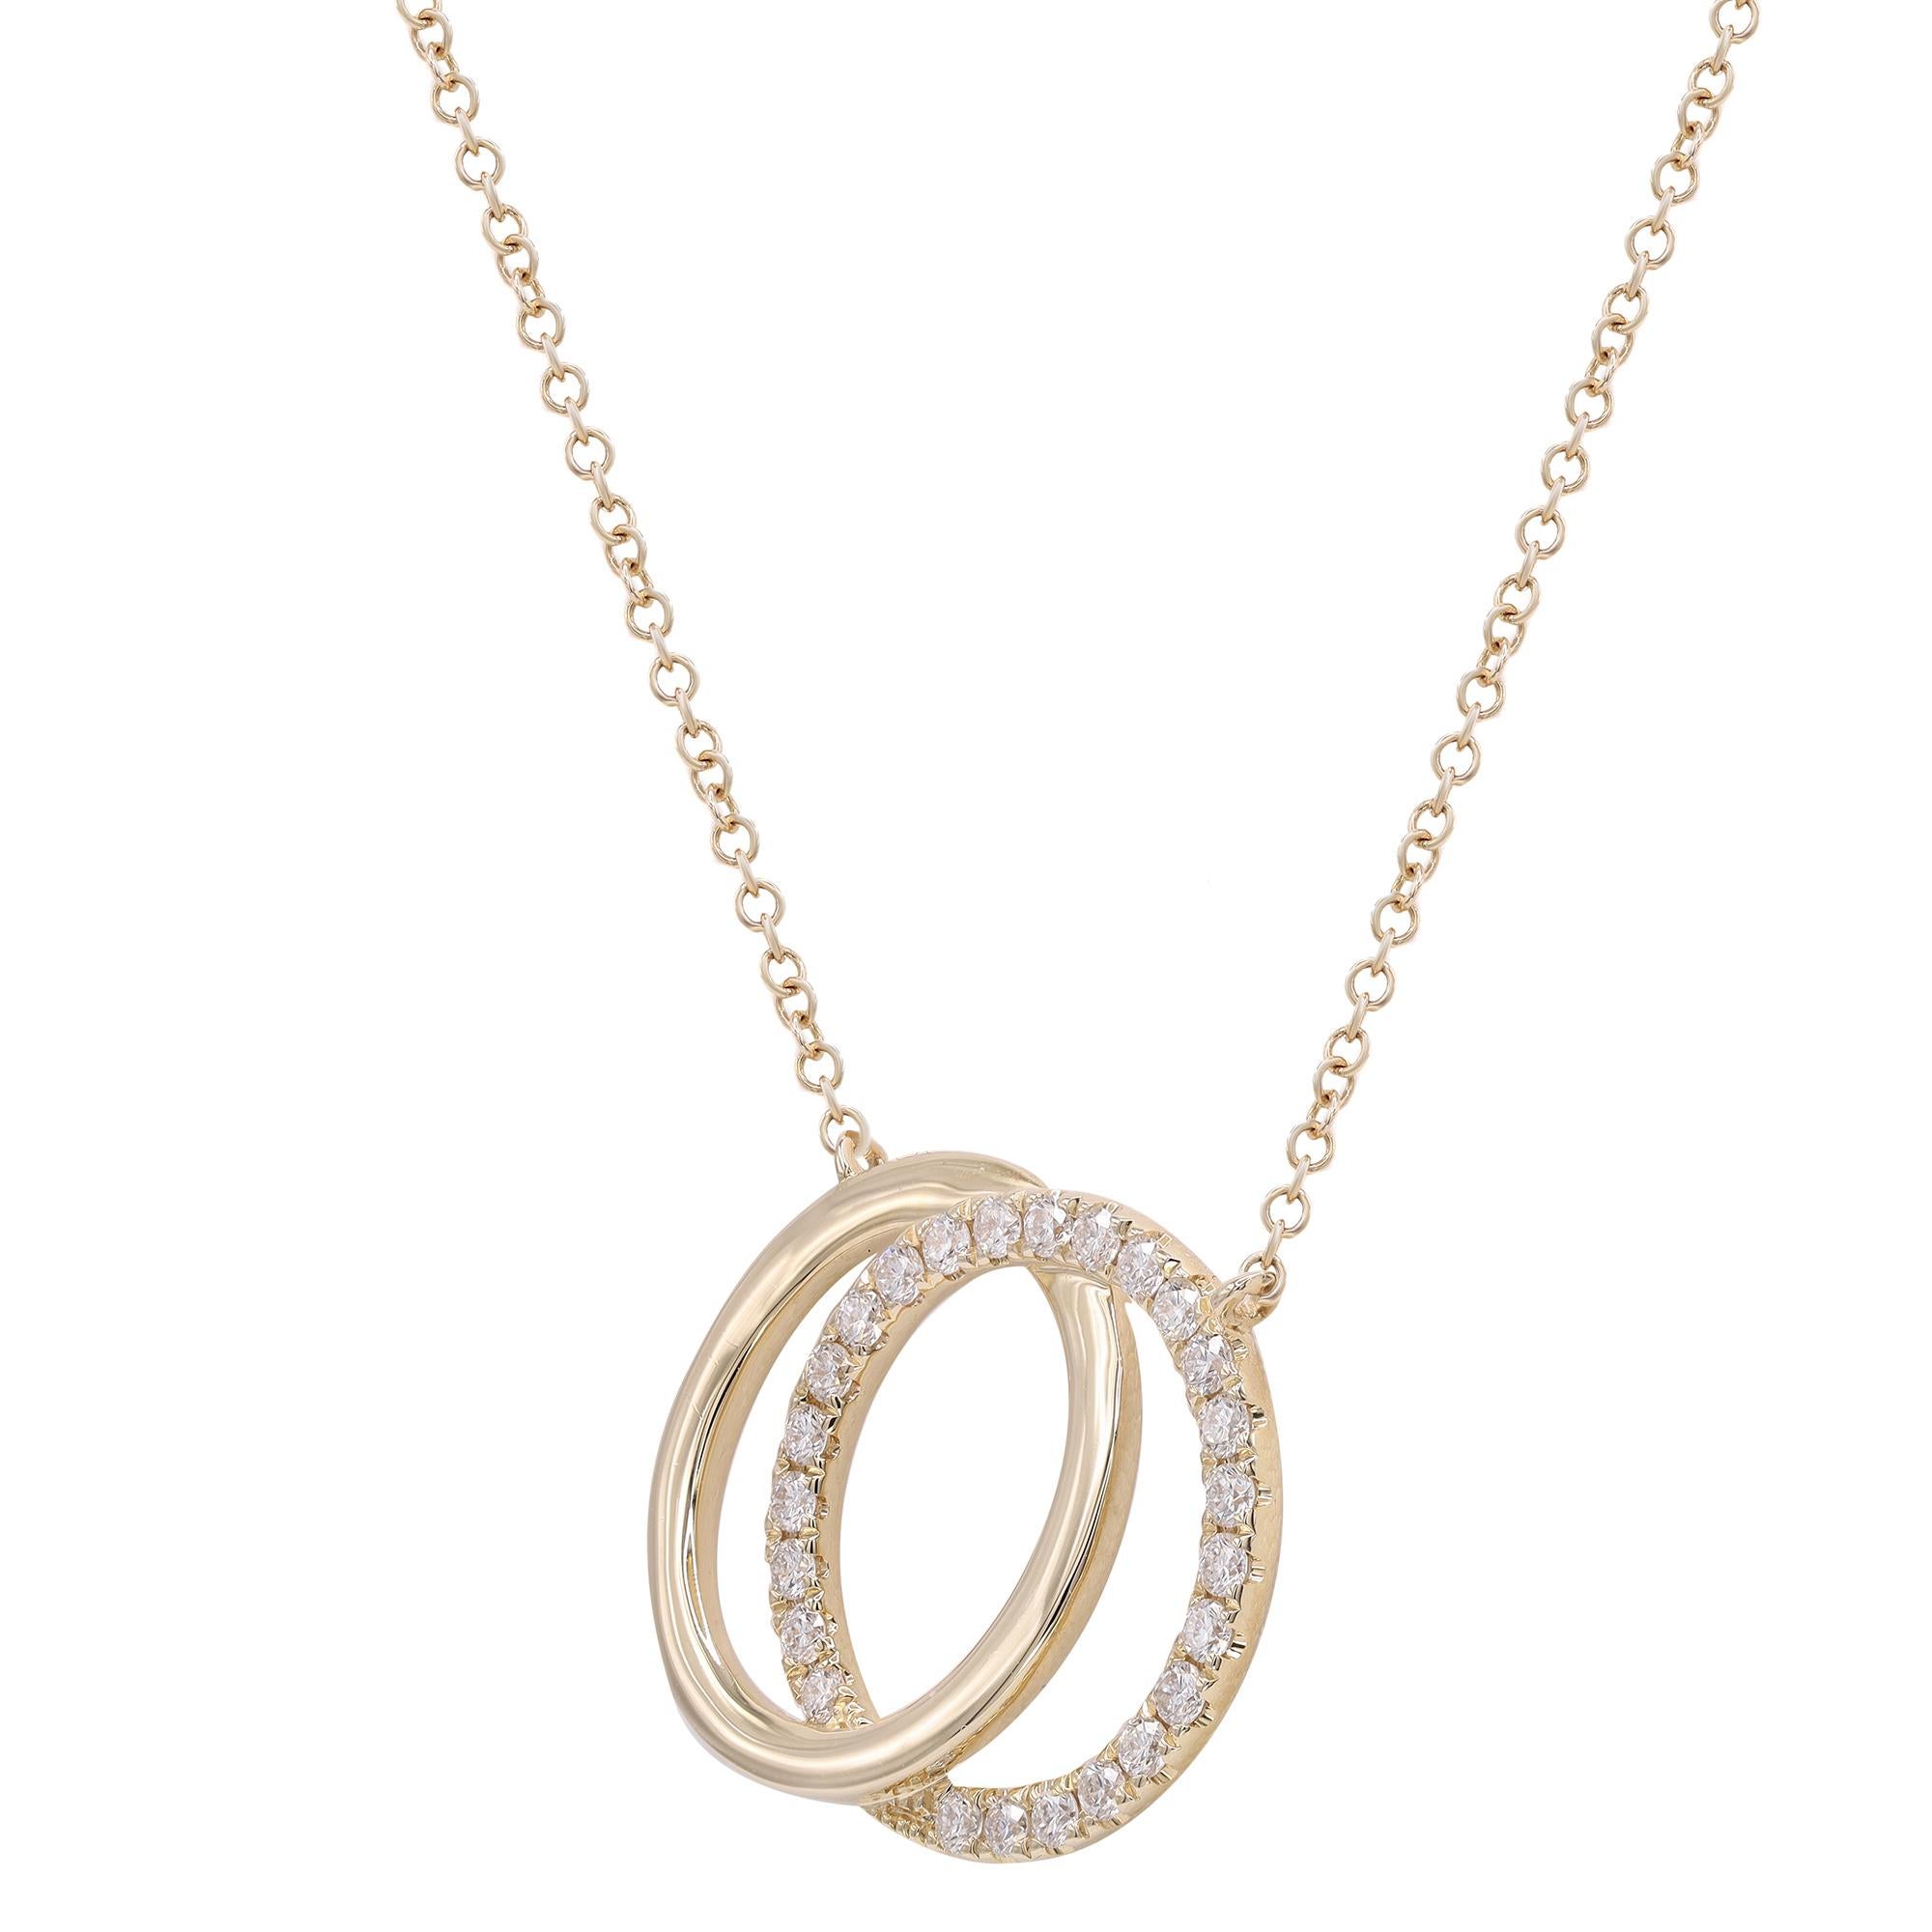 This gorgeous 14k yellow gold interlocking rings diamond pendant necklace beautifully represents the inseparable bond between two souls. A round cut diamond studded ring is interlocked with a high polished yellow gold ring in an everlasting embrace.